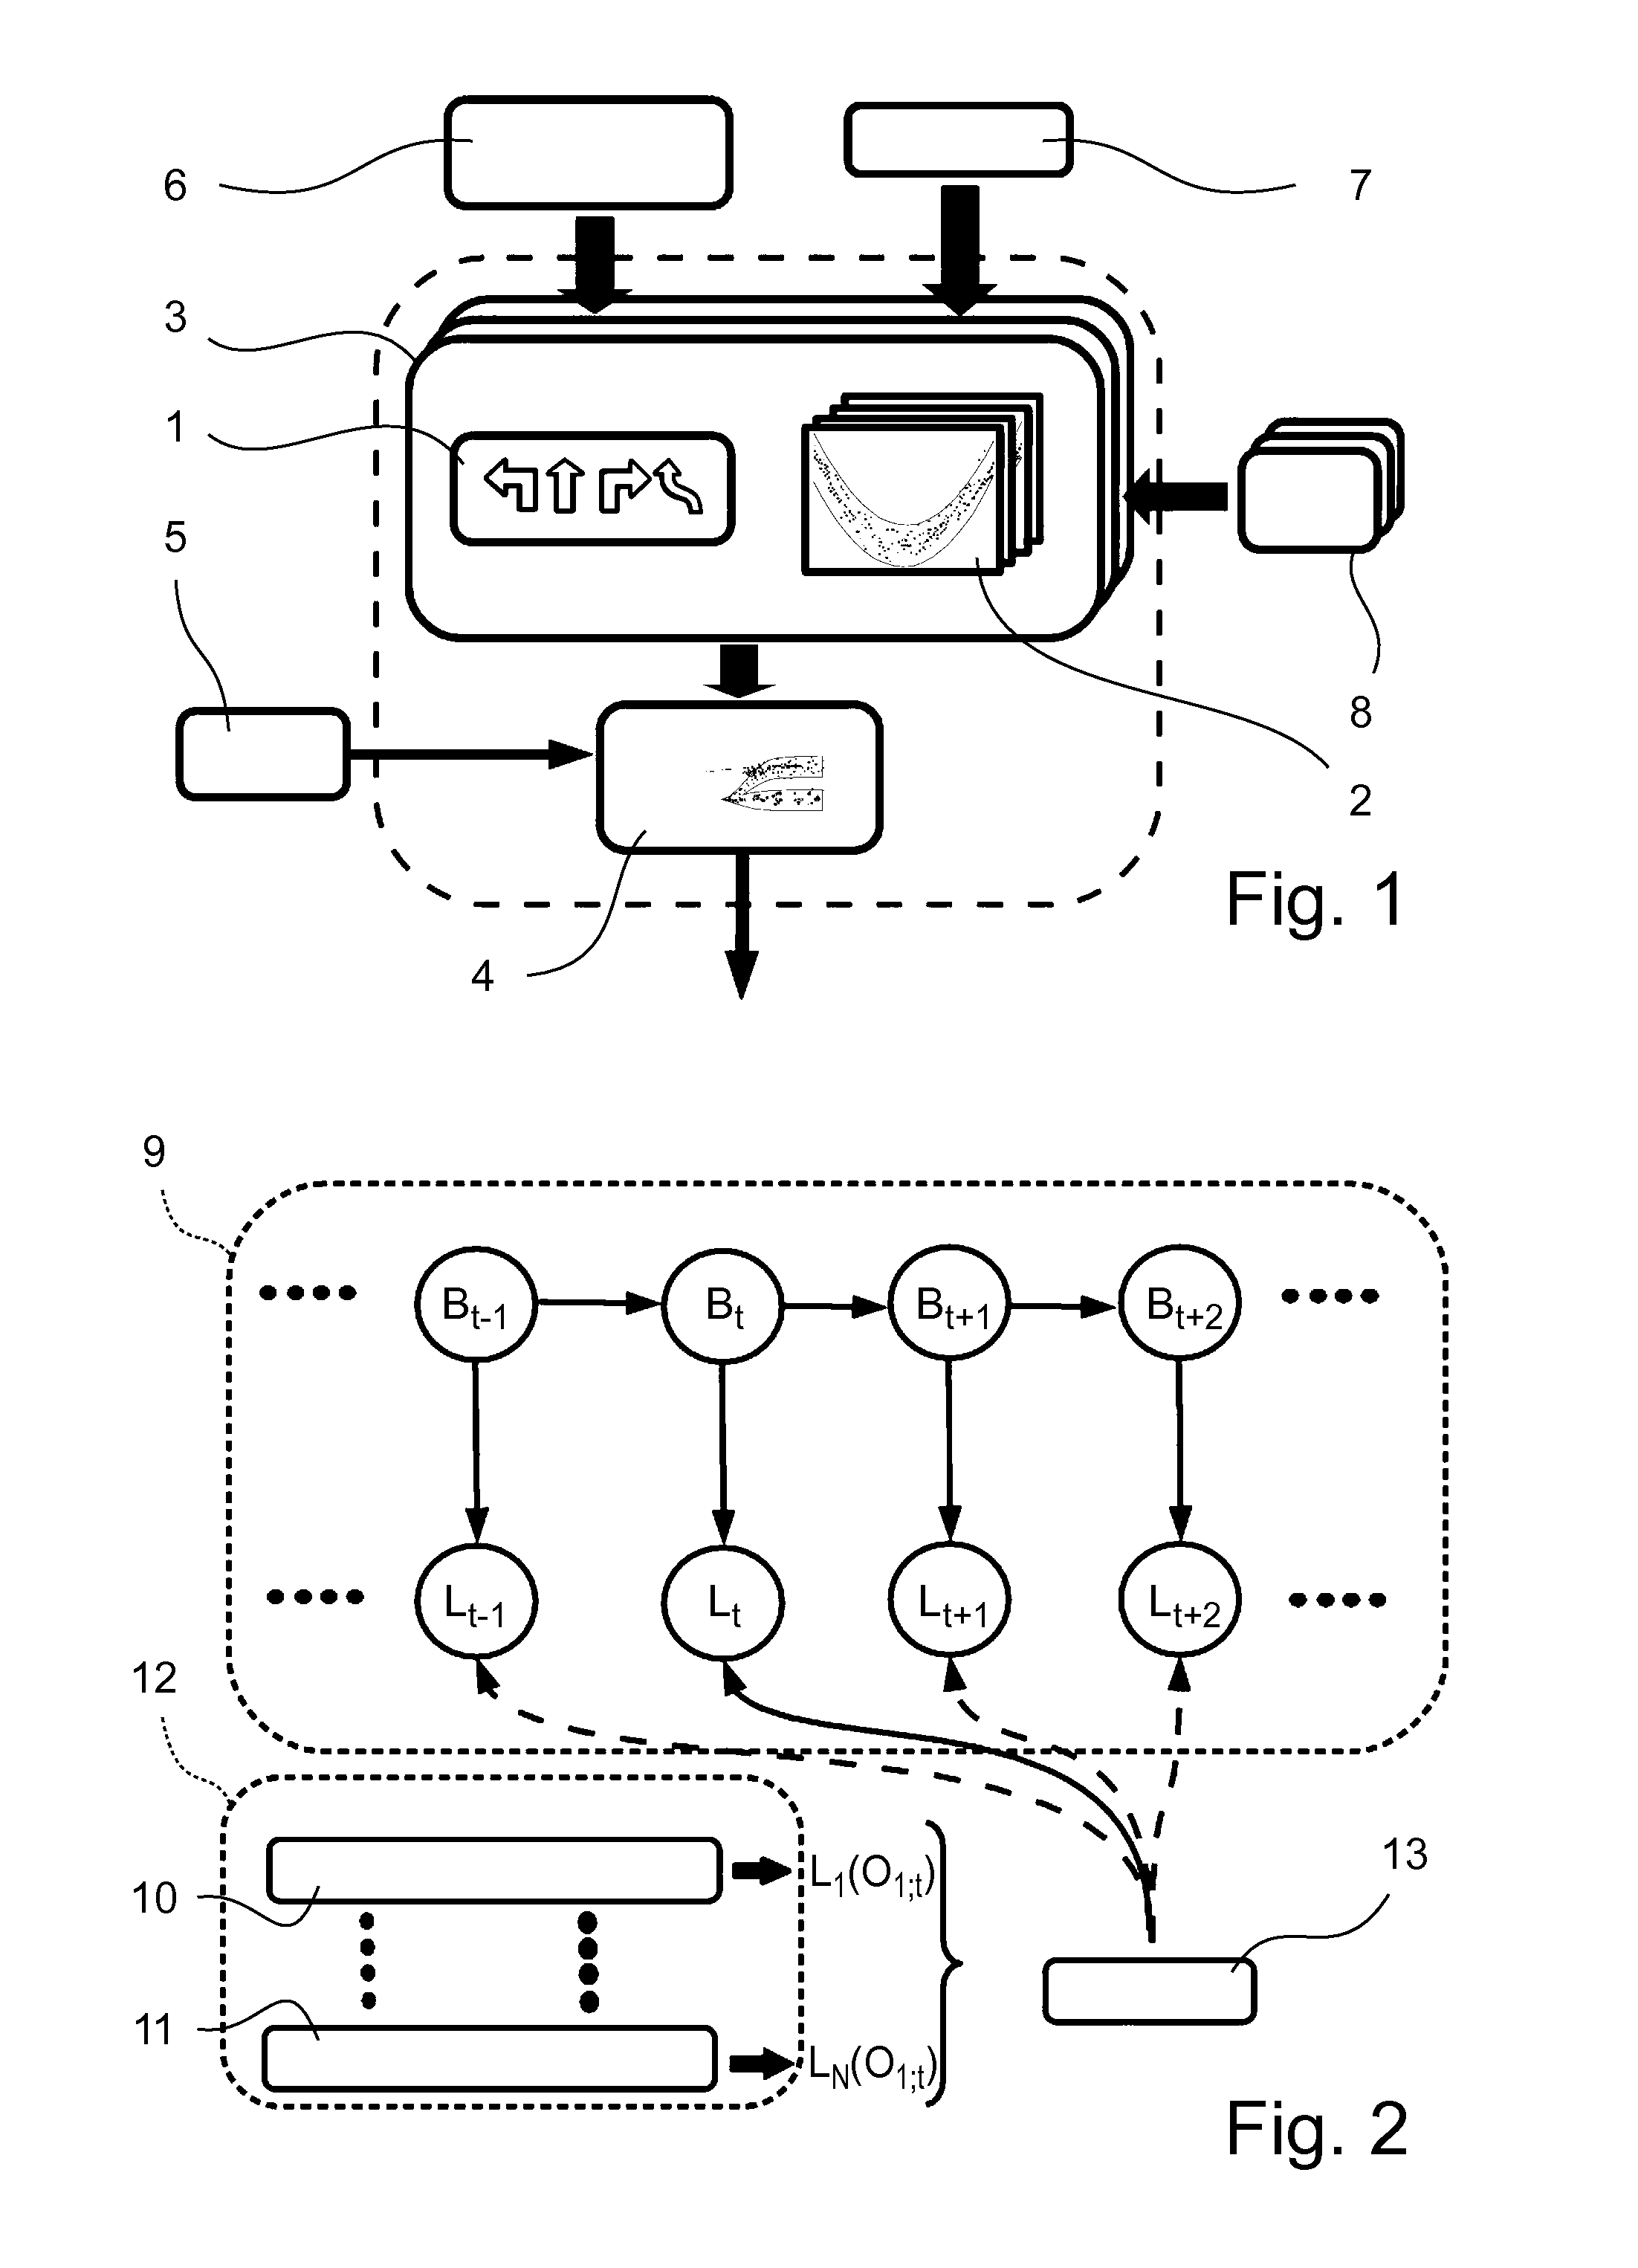 Vehicle or traffic control method and system